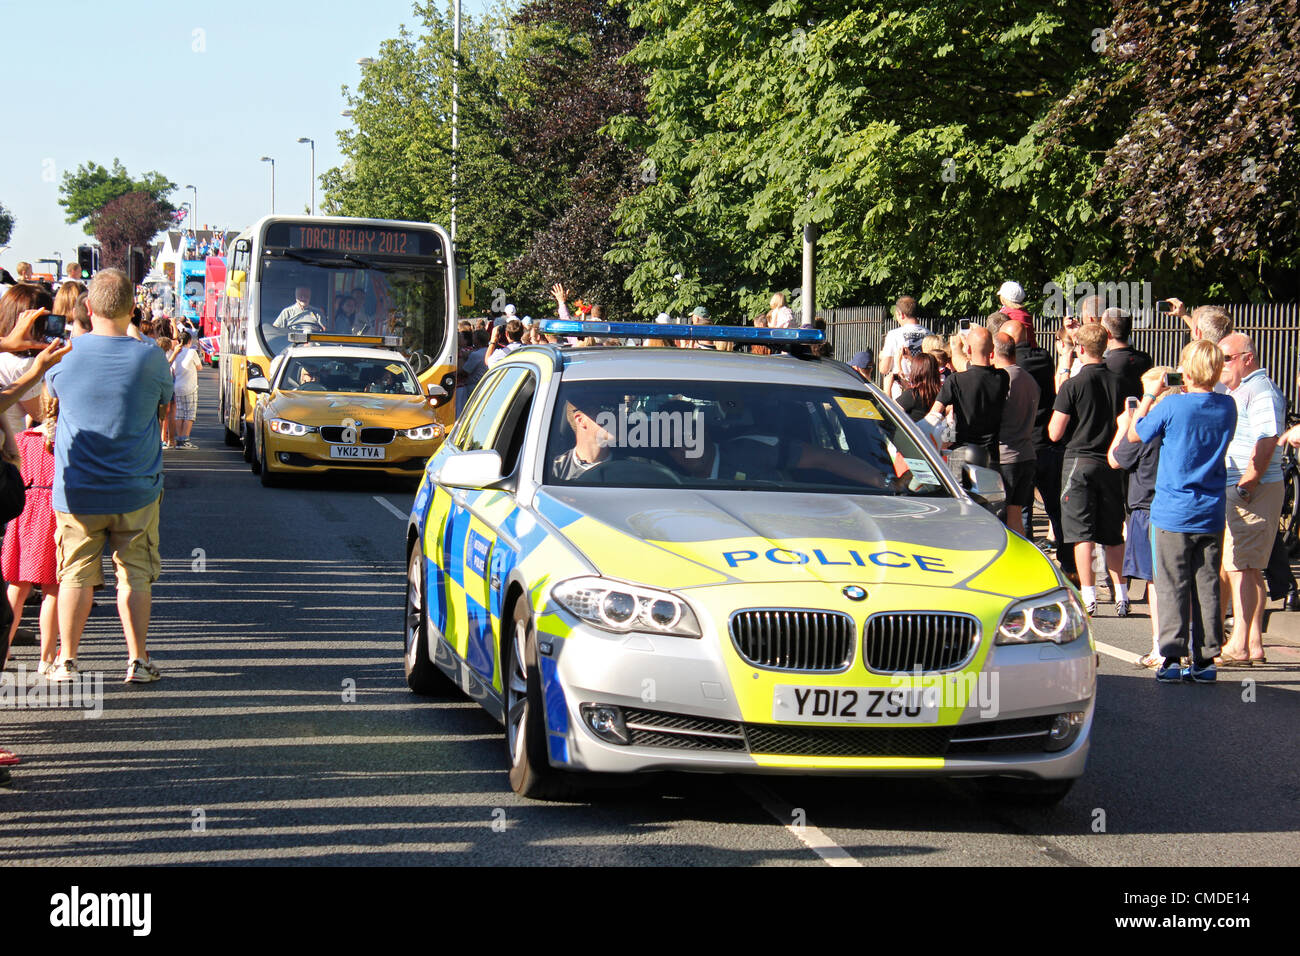 24 July 2012. Hook Road, Chessington, Surrey UK. 8.30am. Olympic Torch Relay day 67. A police car clears the way for the official entourage of cars and buses ahead of the tourch bearer. Credit:  Julia Gavin / Alamy Live News Stock Photo